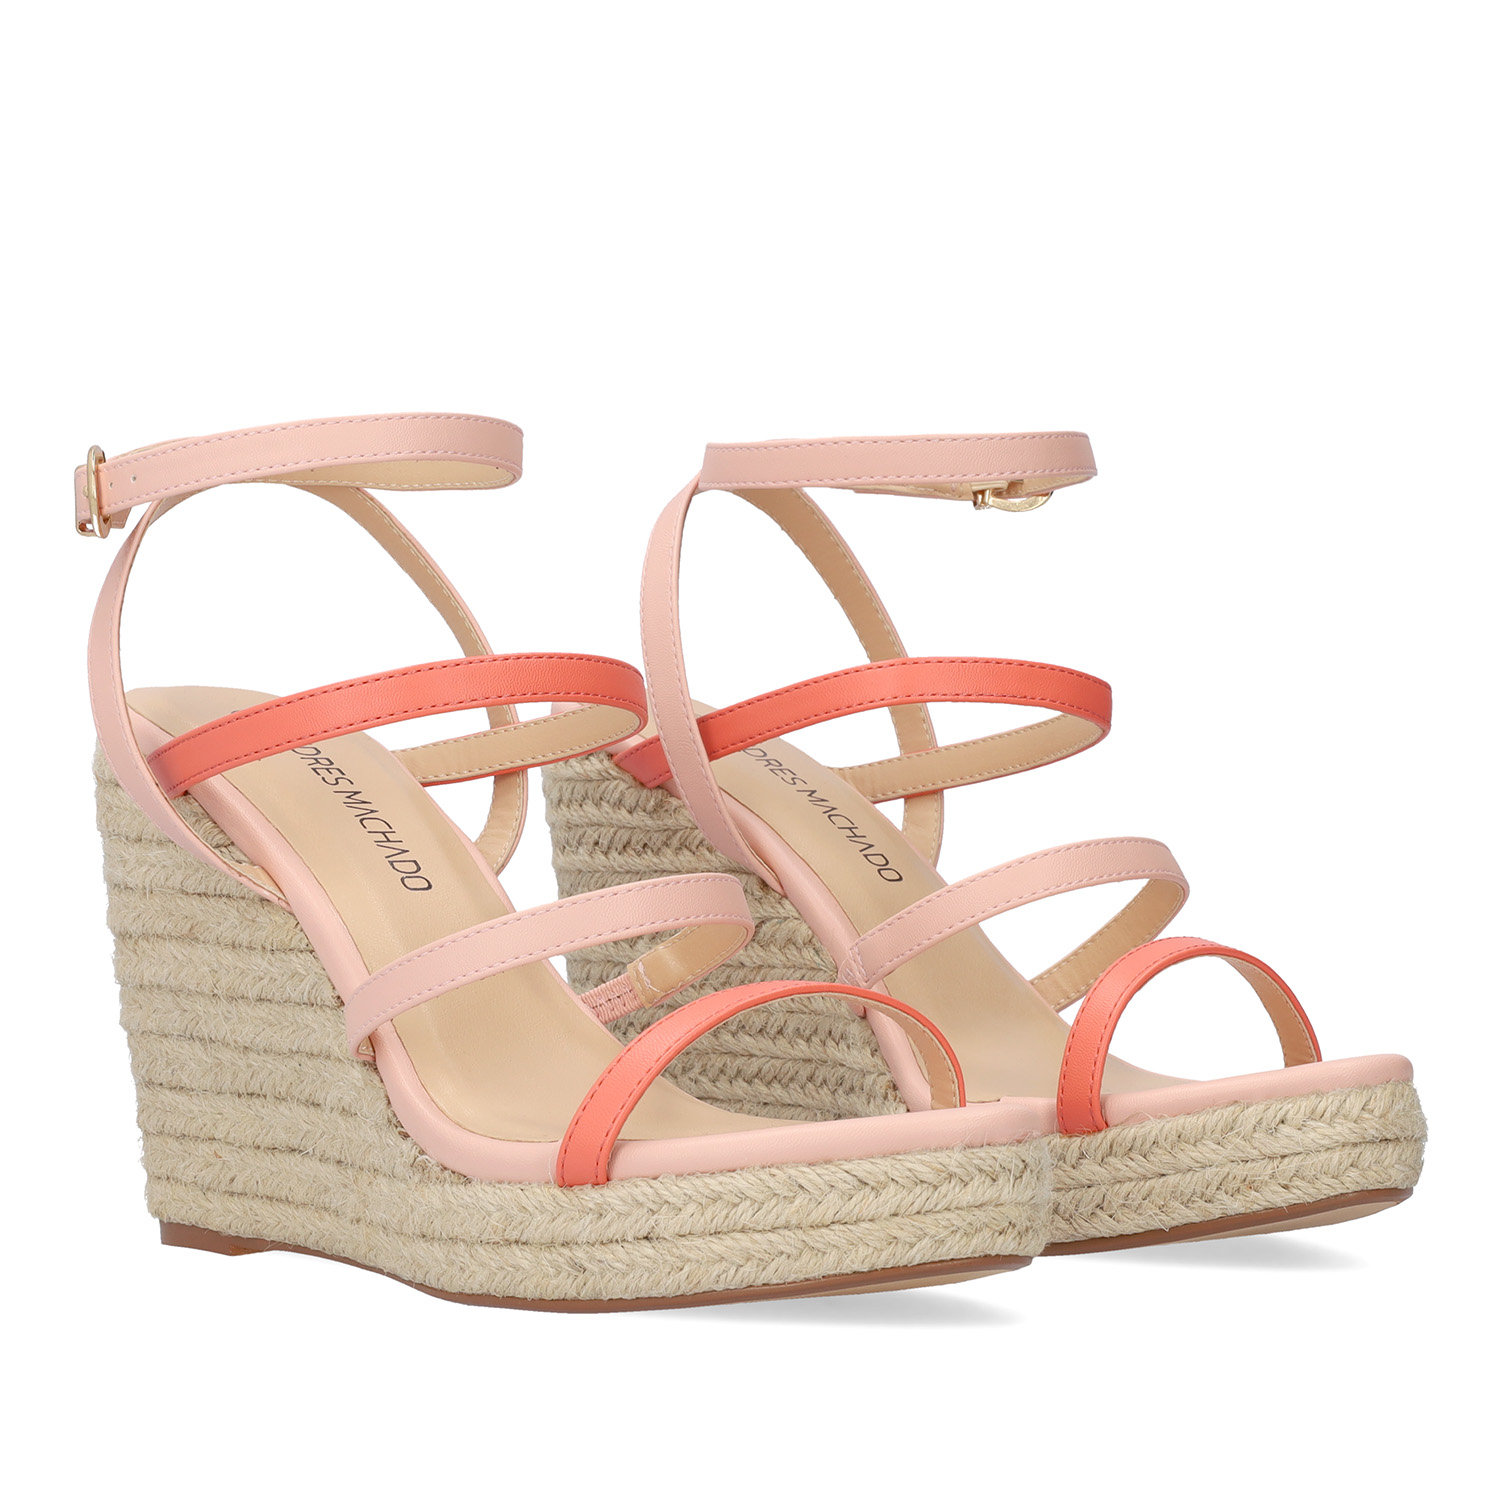 Salmon-colored soft fabric sandal with a jute wedge 